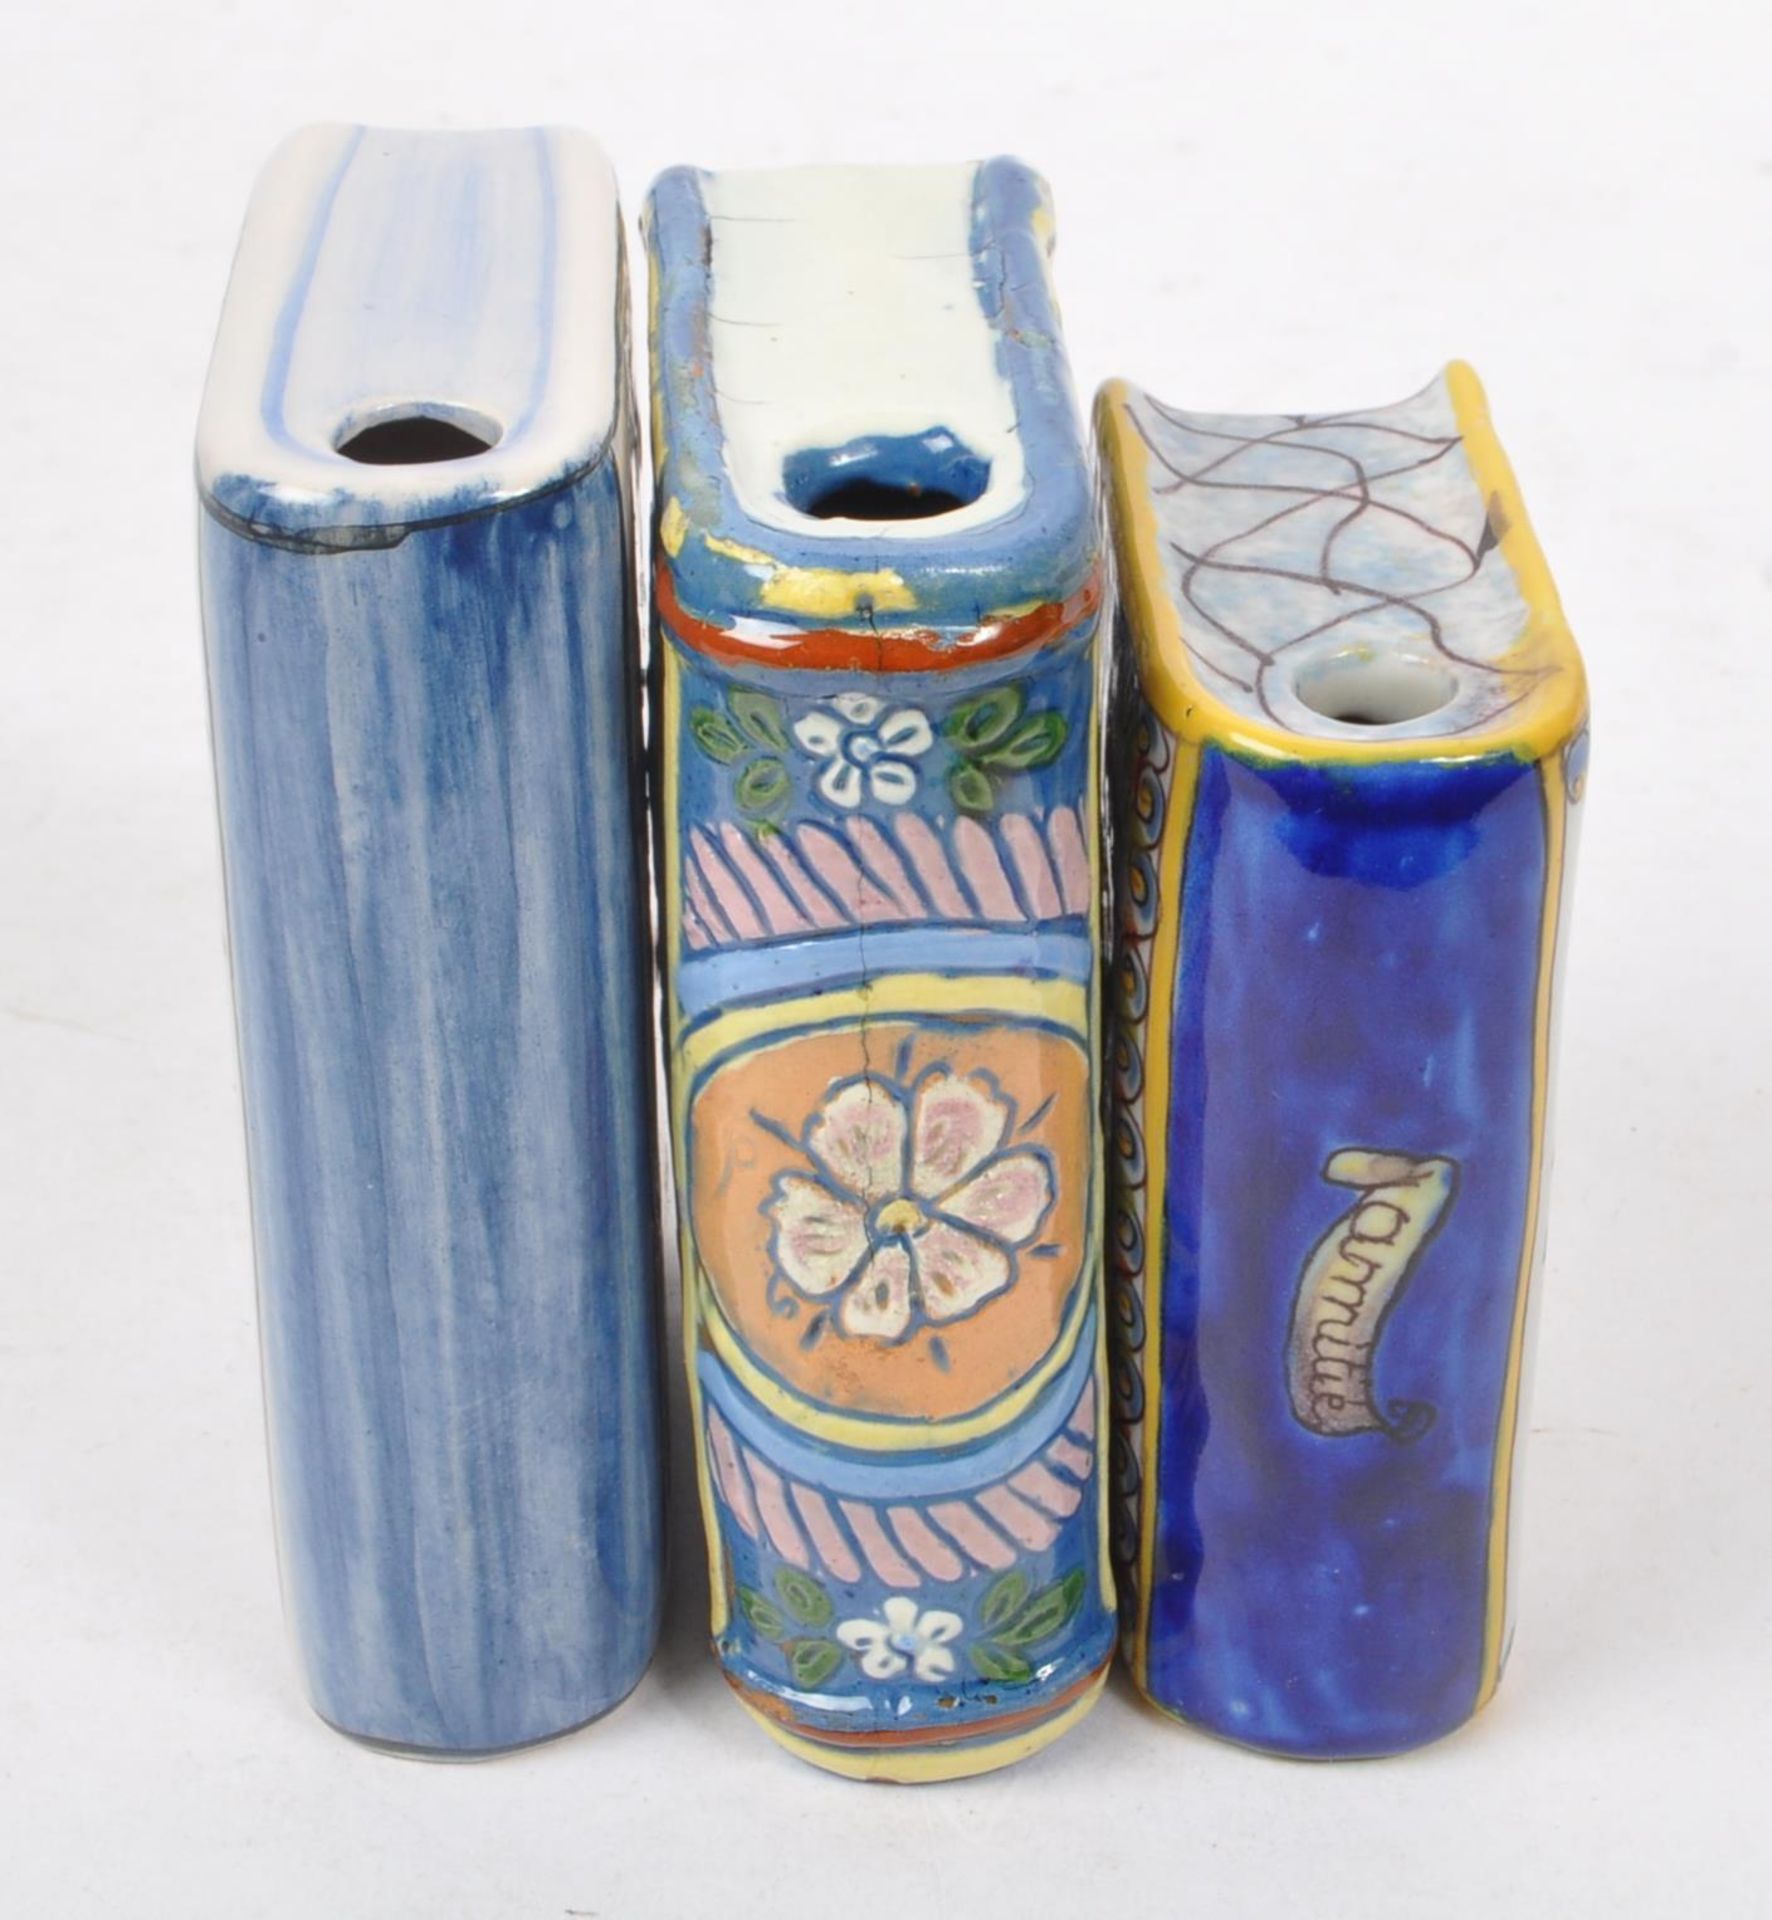 THREE CERAMIC HAND PAINTED BOTTLES IN THE FORM OF BOOKS - Image 4 of 6